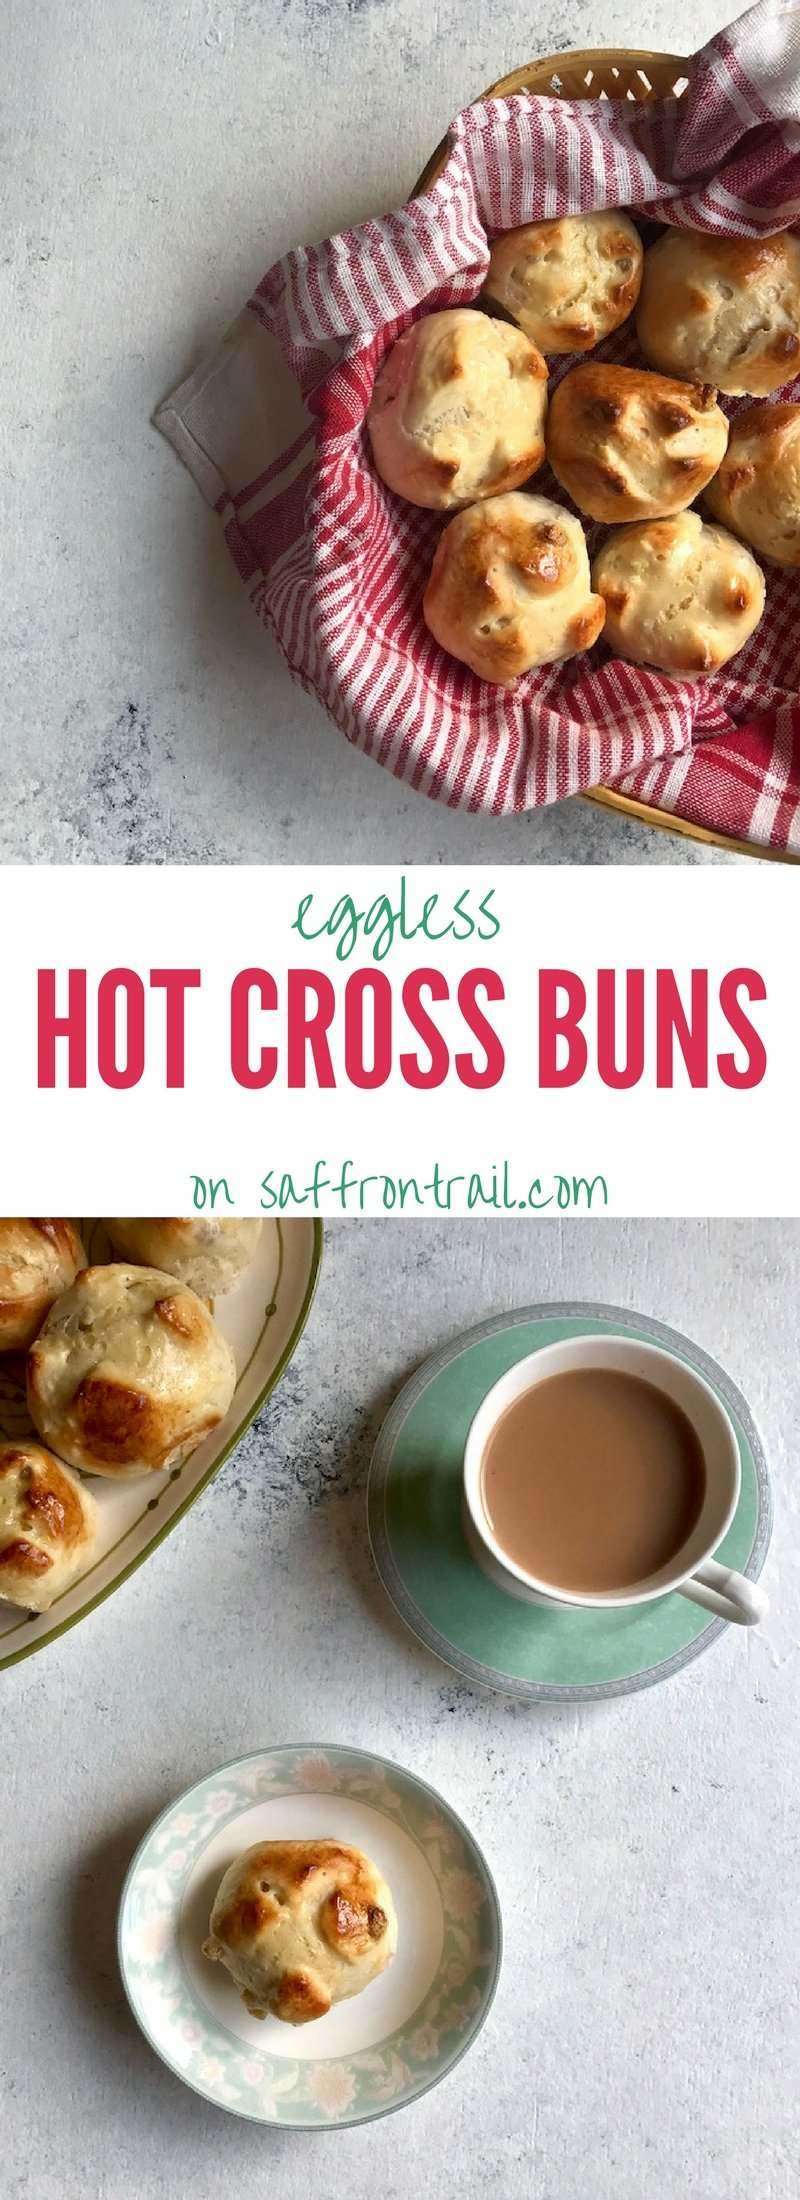 Hot cross buns but EGGFREE! One for your daughter, one for you son, you just cannot miss this Hot Cross Bun! Get the detailed no-fail recipe here